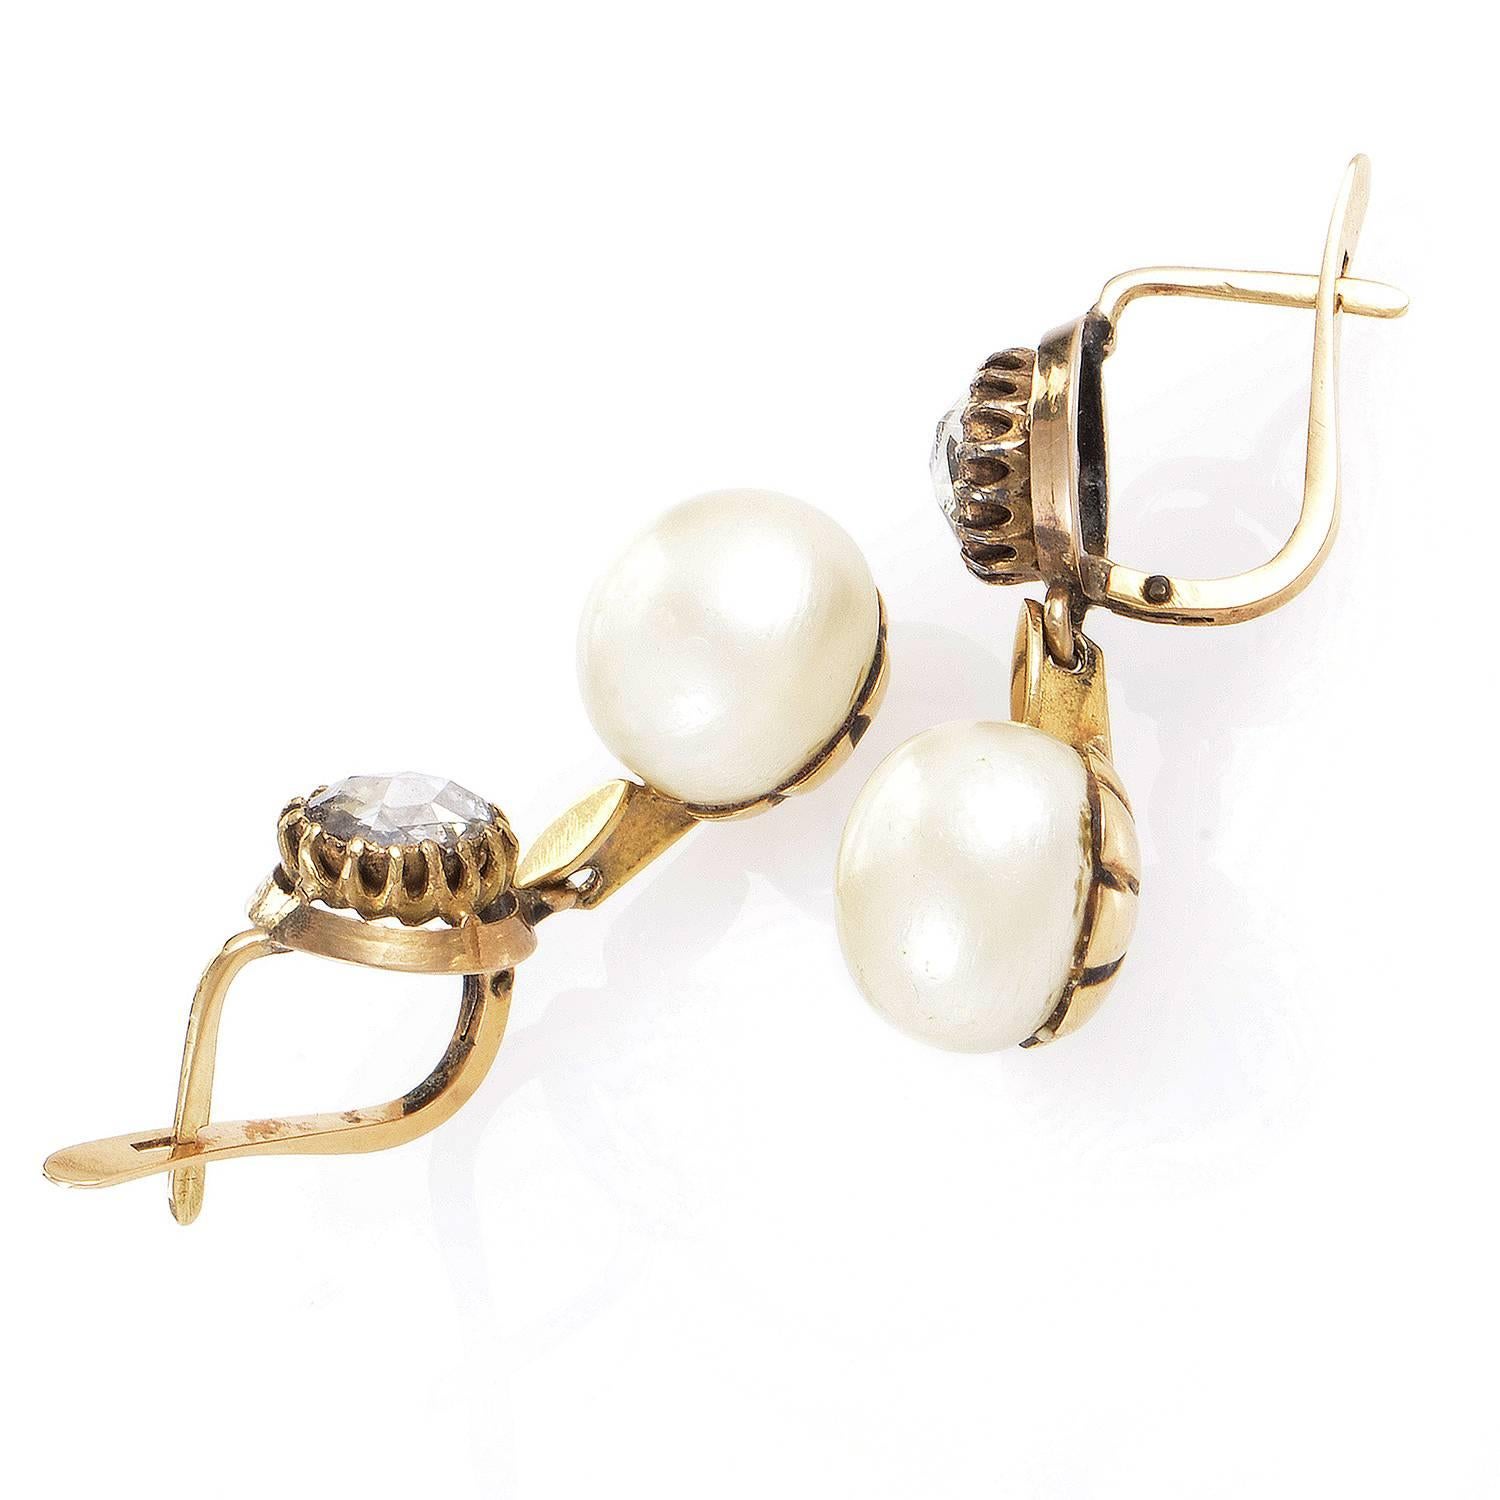 The classic luxurious blend of charming 18K yellow gold and lustrous diamonds weighing in total approximately 1.50 carats is perfectly complemented by the gorgeous pearls and their traditional allure in these nifty and tasteful earrings.